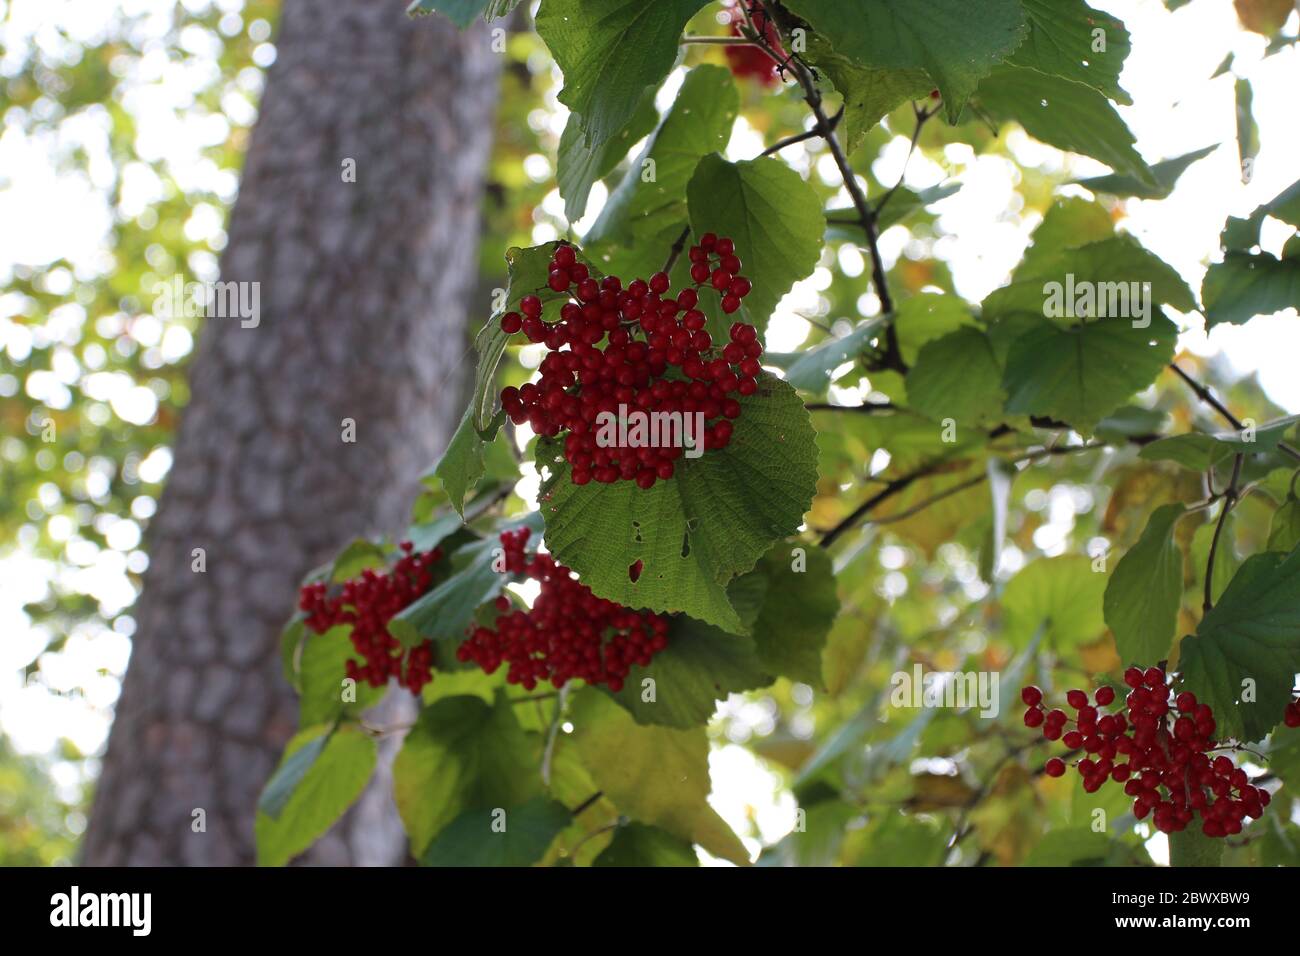 Clusters of red berries and broadleaves of a Viburnum dilatatum Cardinal Candy shrub in the fall in North Carolina, USA Stock Photo